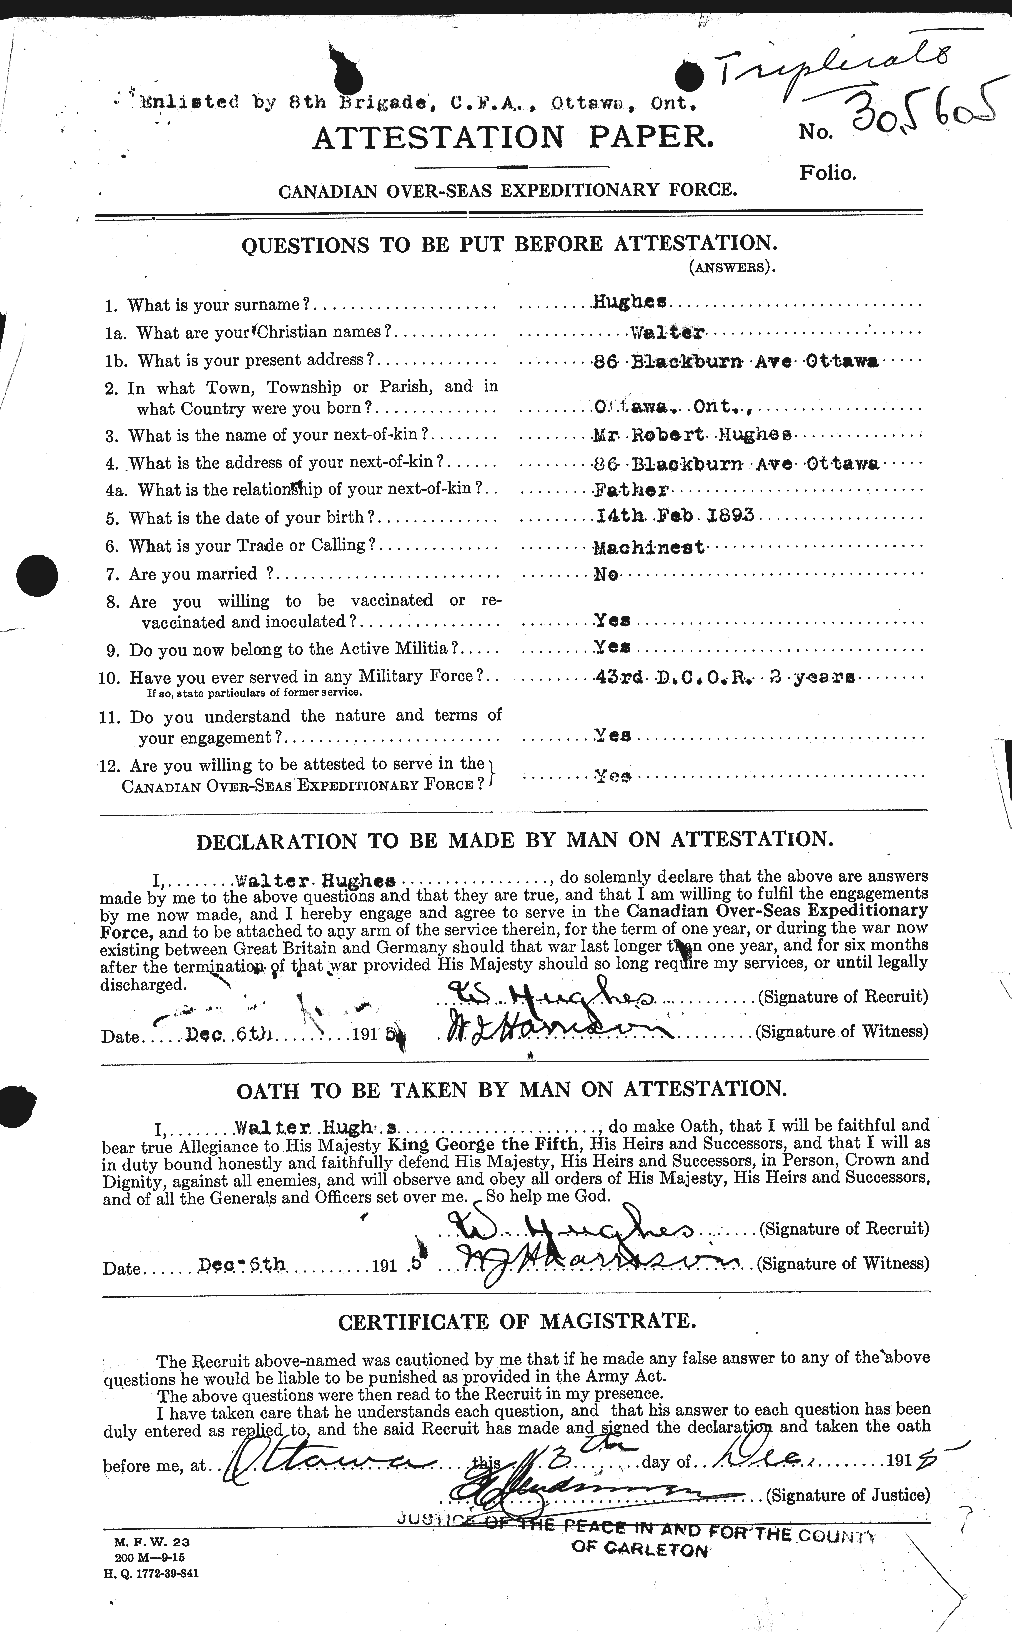 Personnel Records of the First World War - CEF 405853a